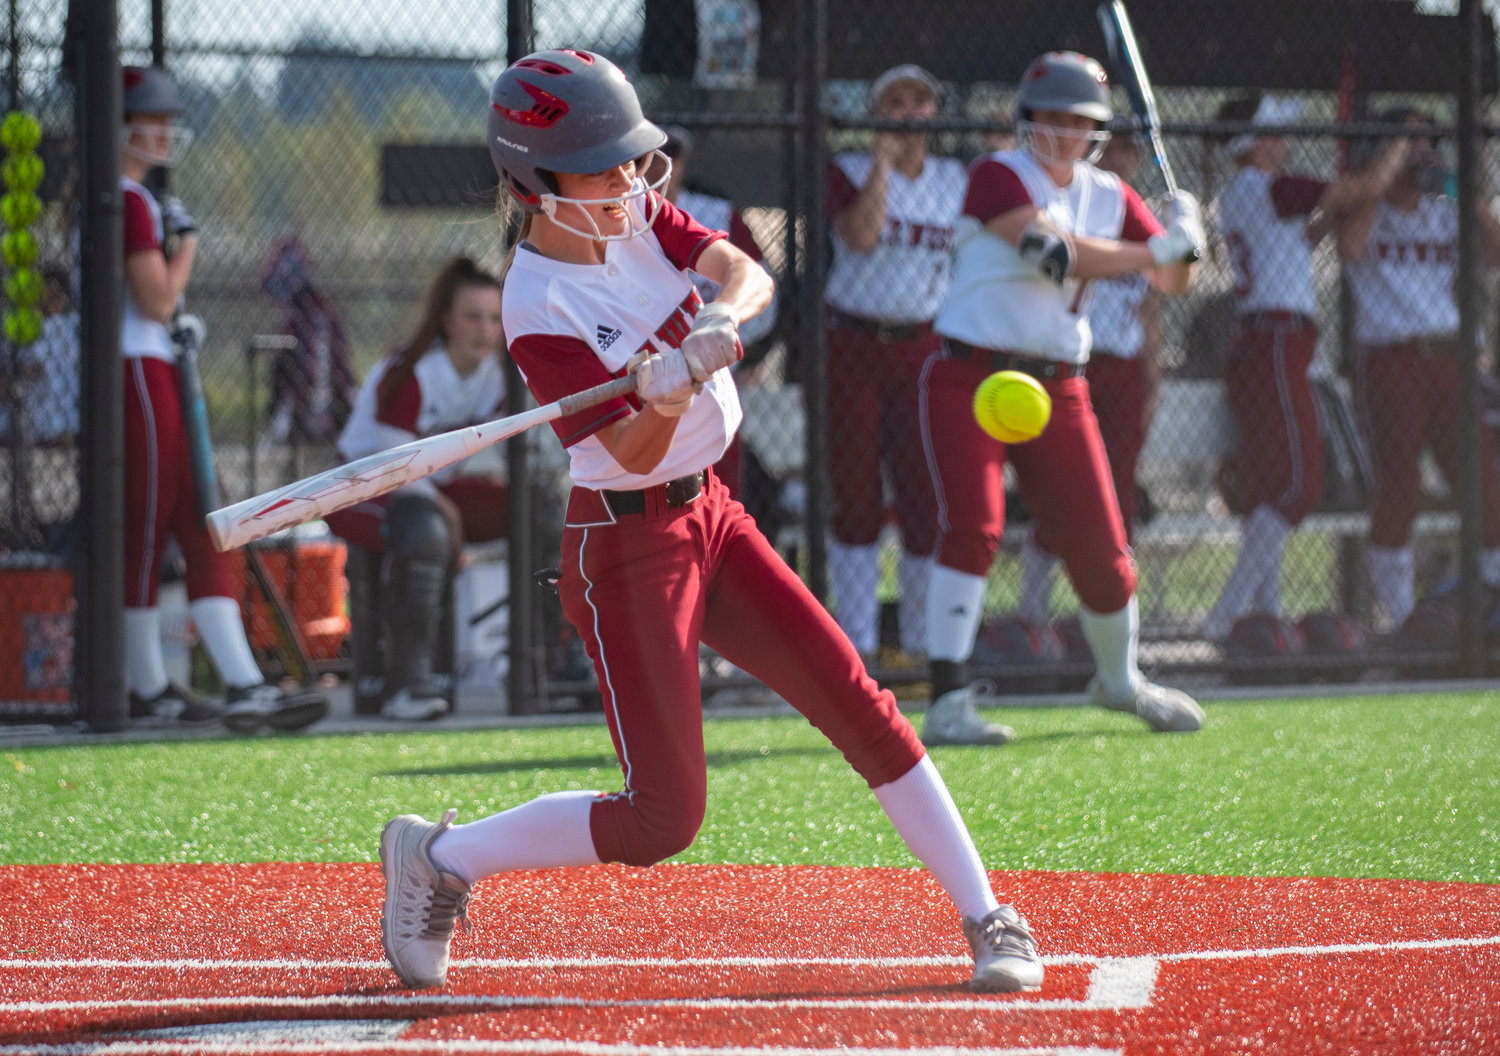 W.F. West sophomore Brielle Etter attacka a Tumwater pitch on Wednesday.